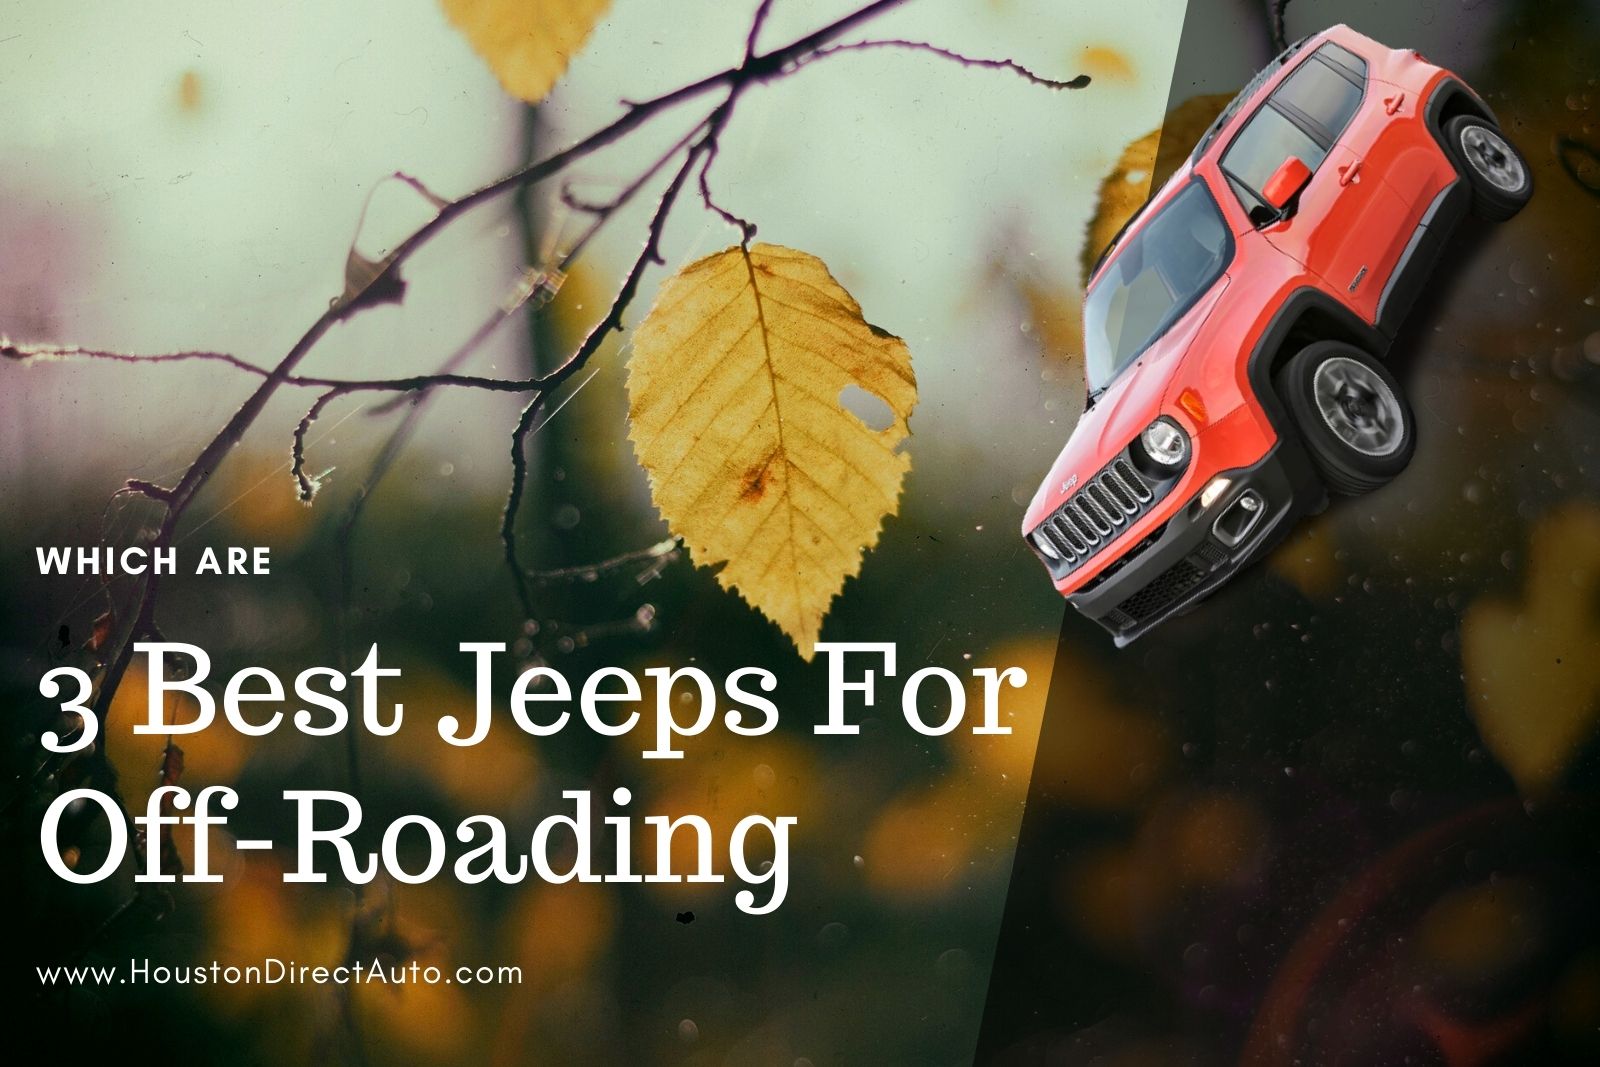 Which Are 3 Best Jeeps For Off-Roading?